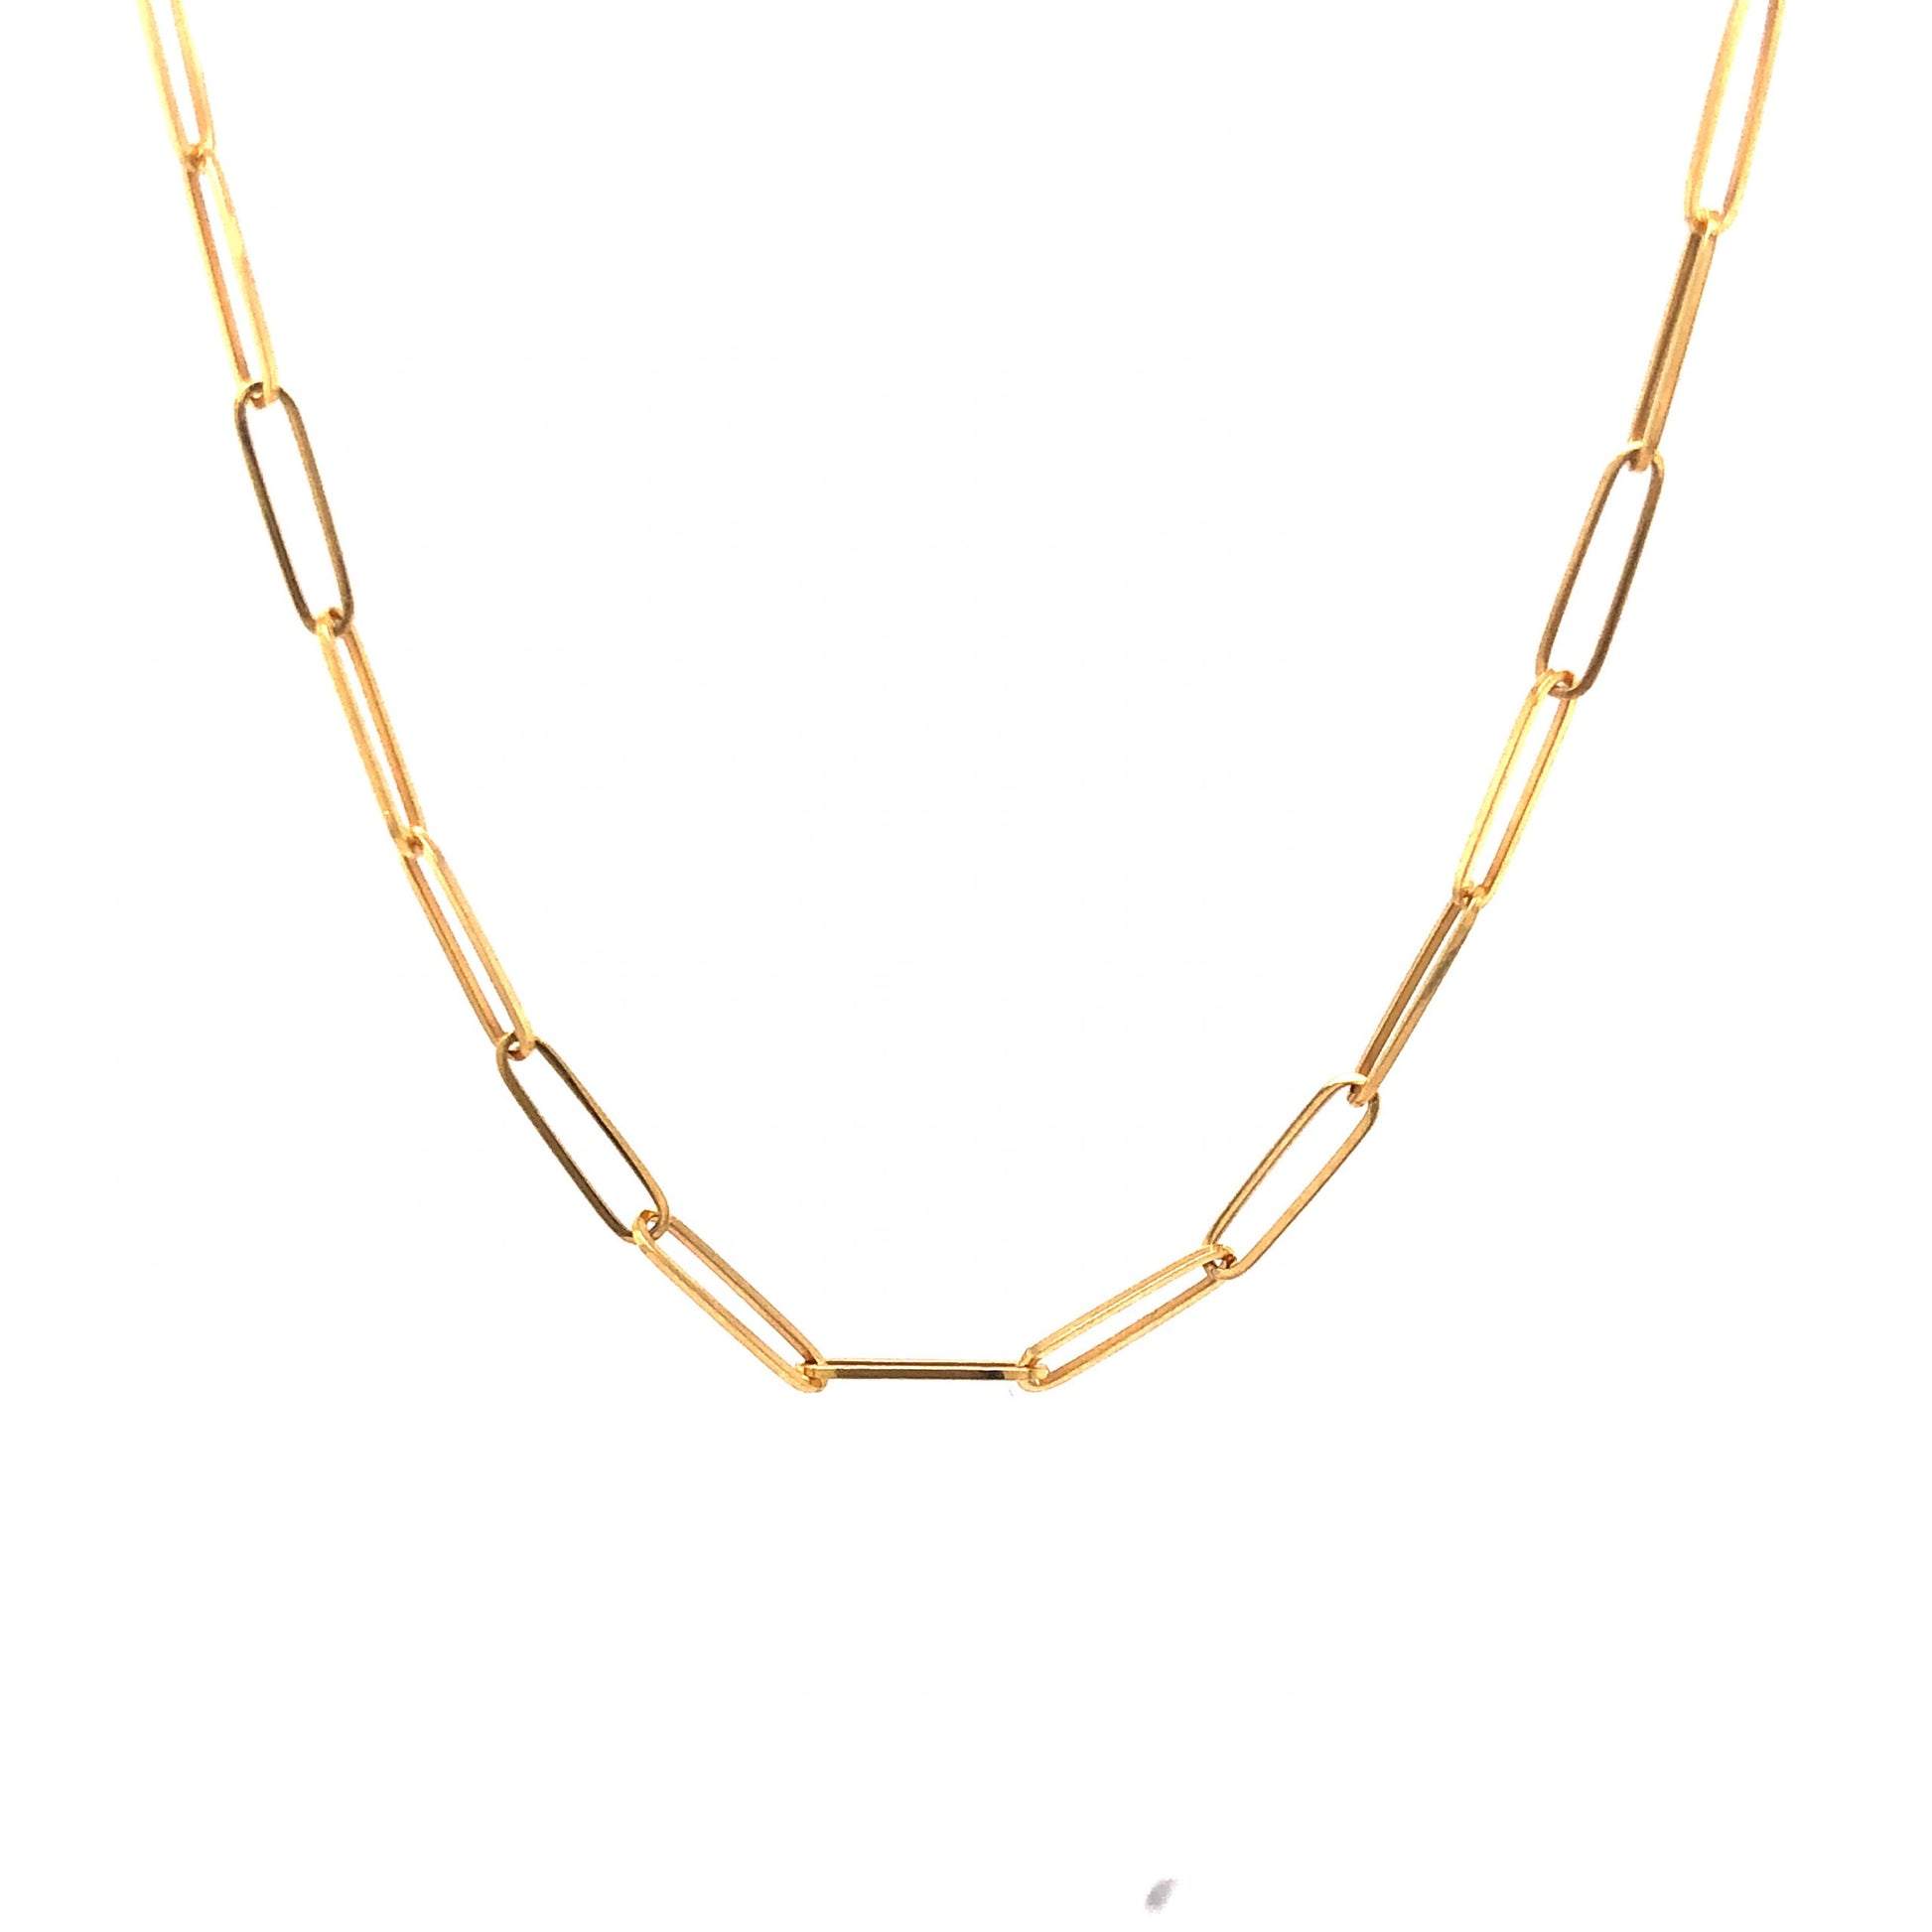 18 Inch Paperclip Chain Necklace in 14k Yellow GoldComposition: 14 Karat Yellow Gold Total Gram Weight: 3.8 g Inscription: 14k
      